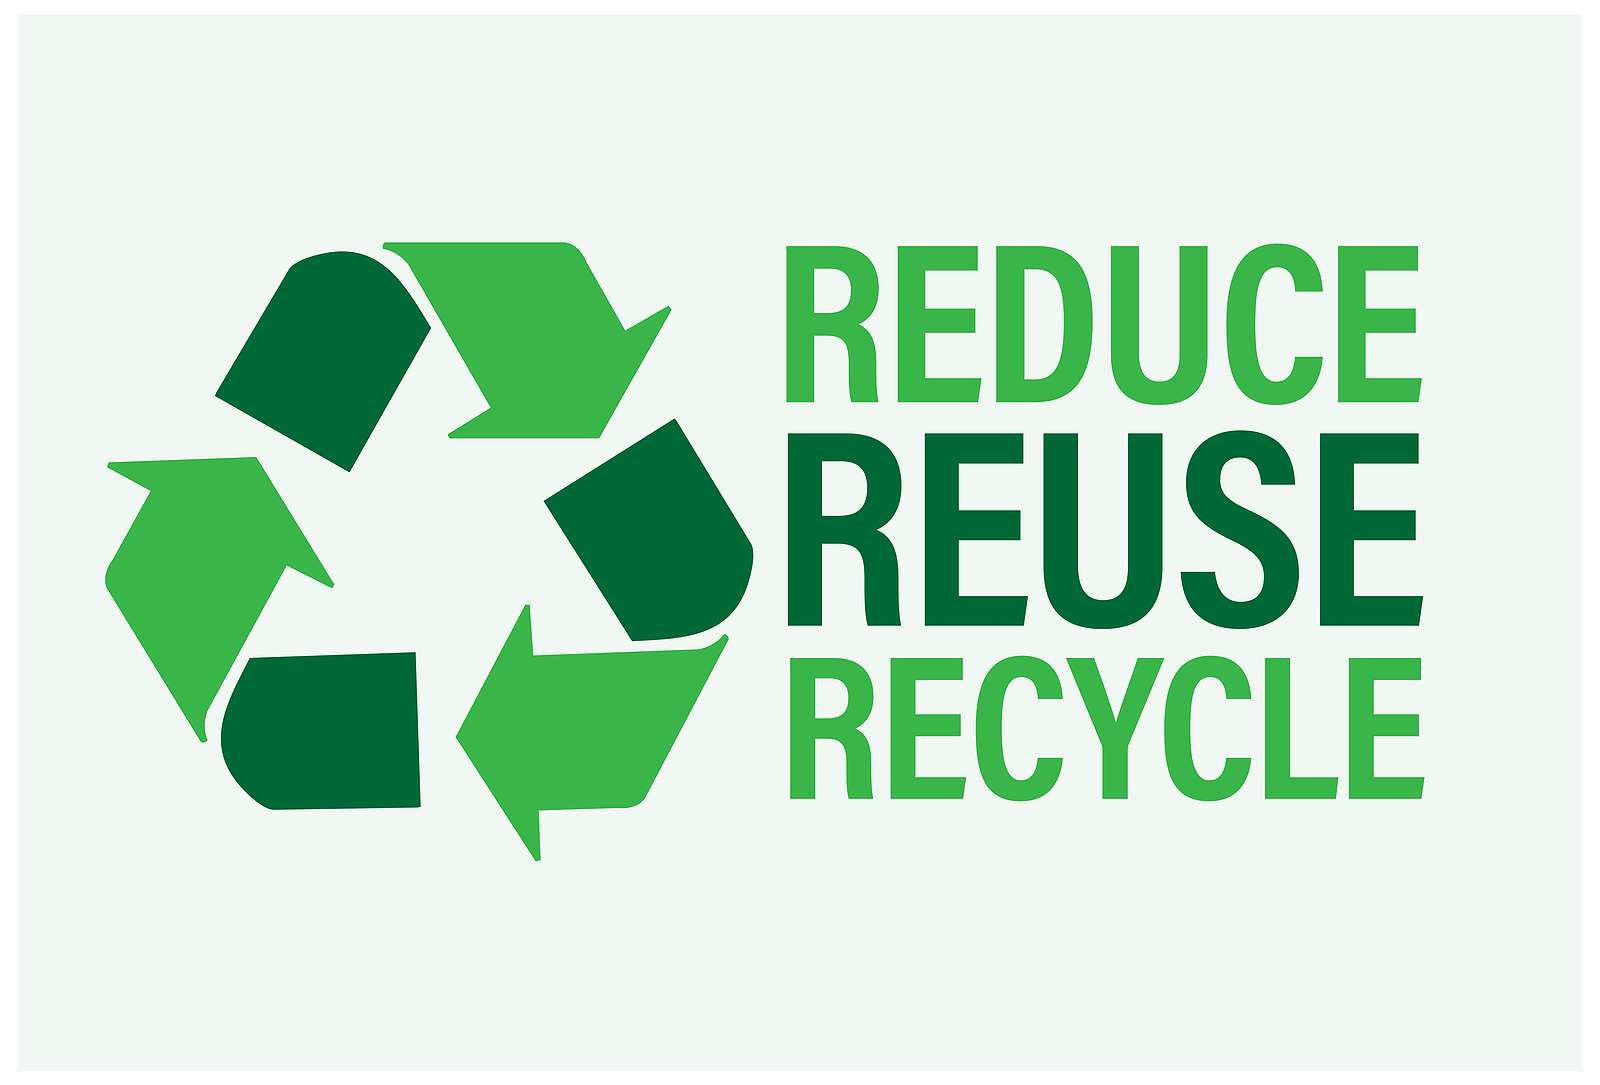 Reducing, Reusing, and Recycling!